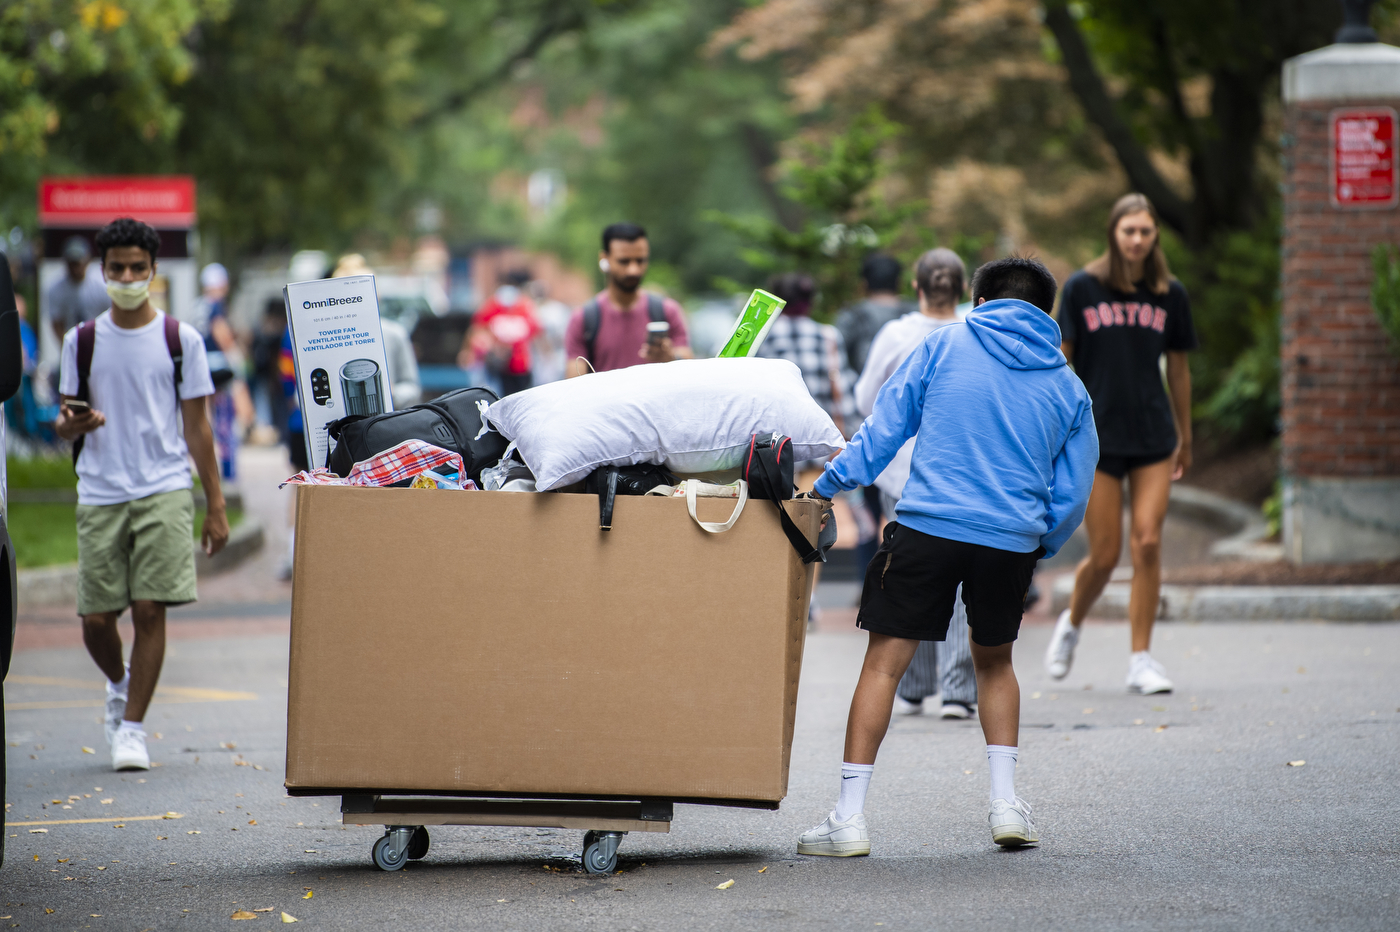 Caption: 08/30/21 - BOSTON, MA - Students move-in on Northeastern’s Boston campus for the start of the Fall semester on Aug. 30, 2021. Photo by Alyssa Stone/Northeastern University